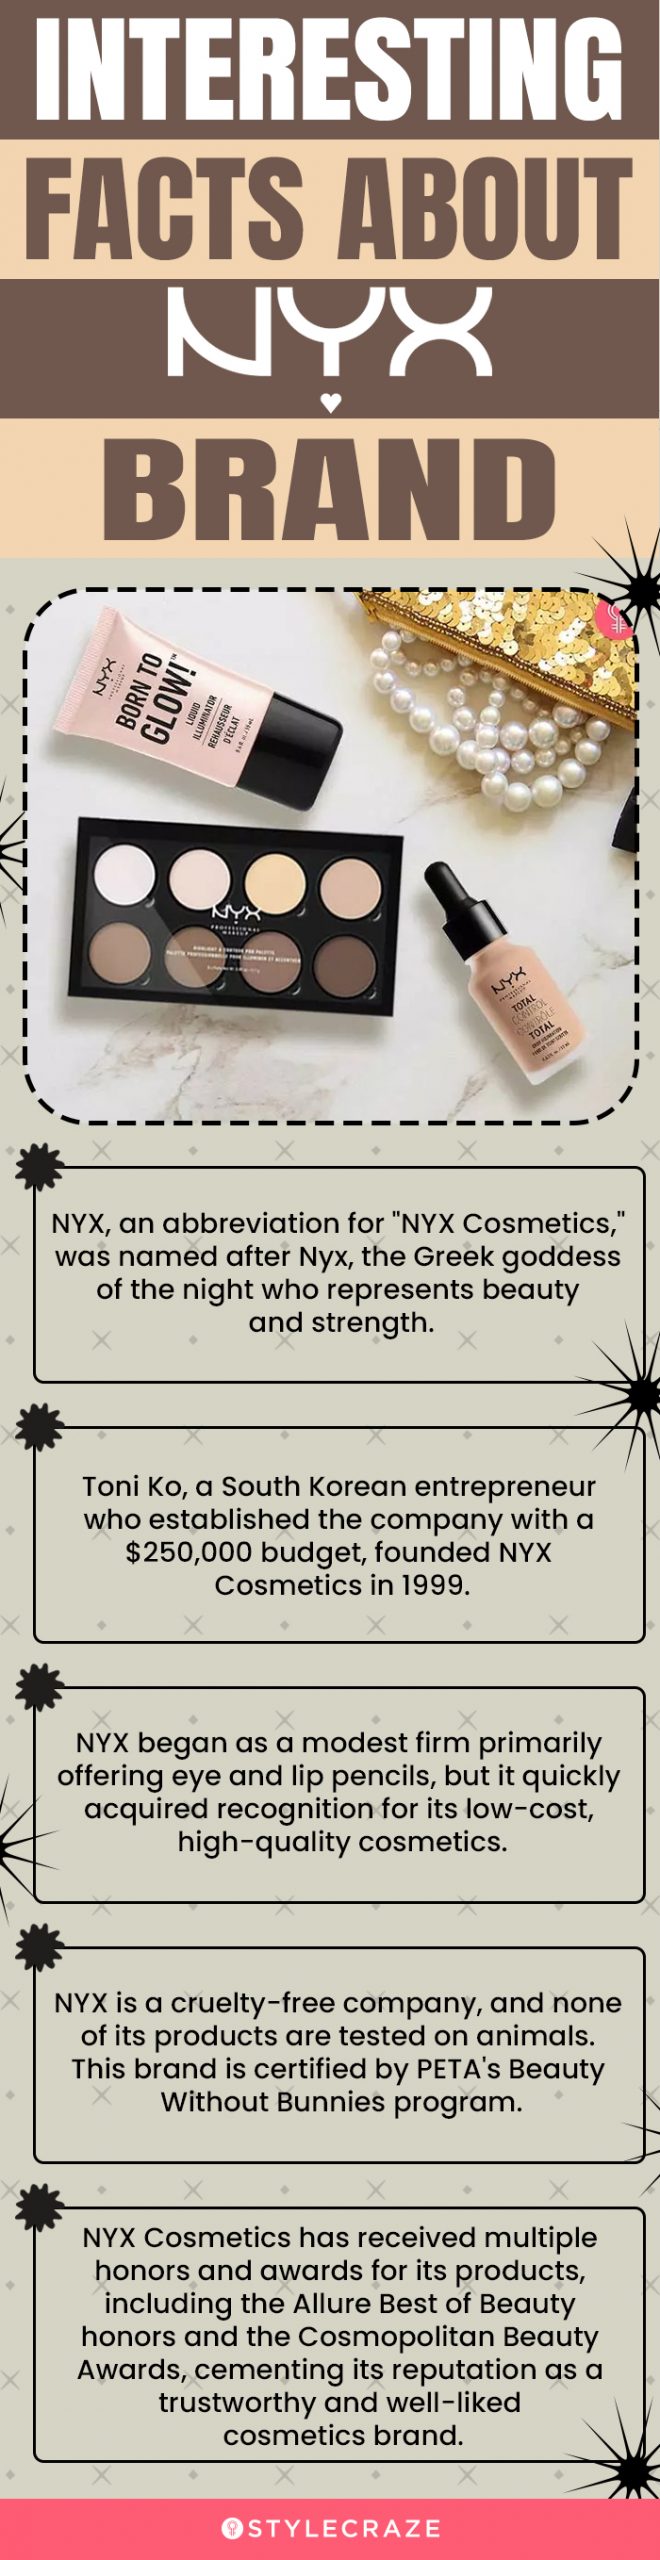 Interesting Facts About NYX Brand (infographic)